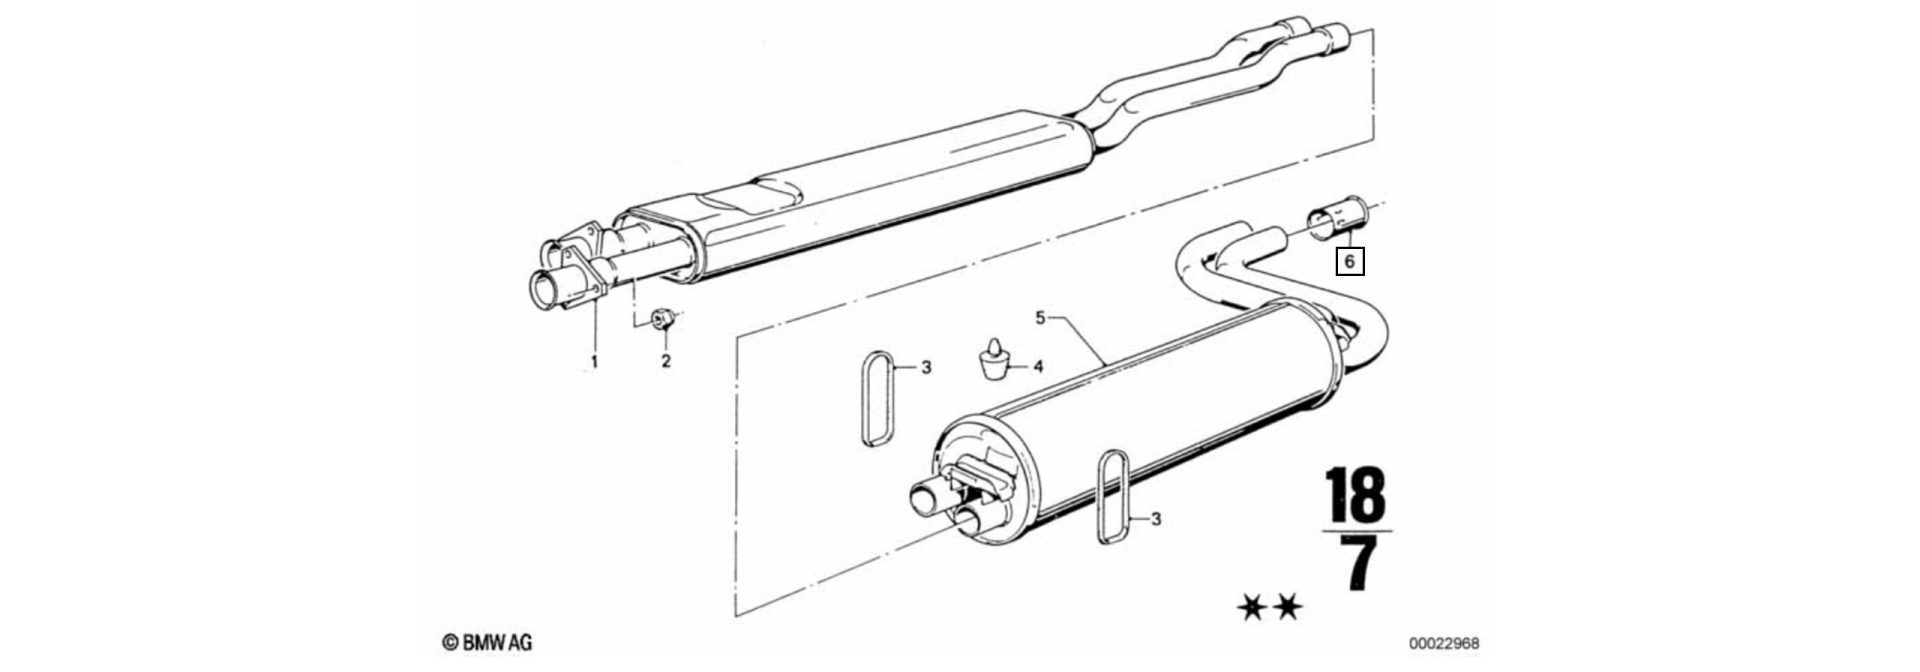 Tailpipe trim exploded-view drawing